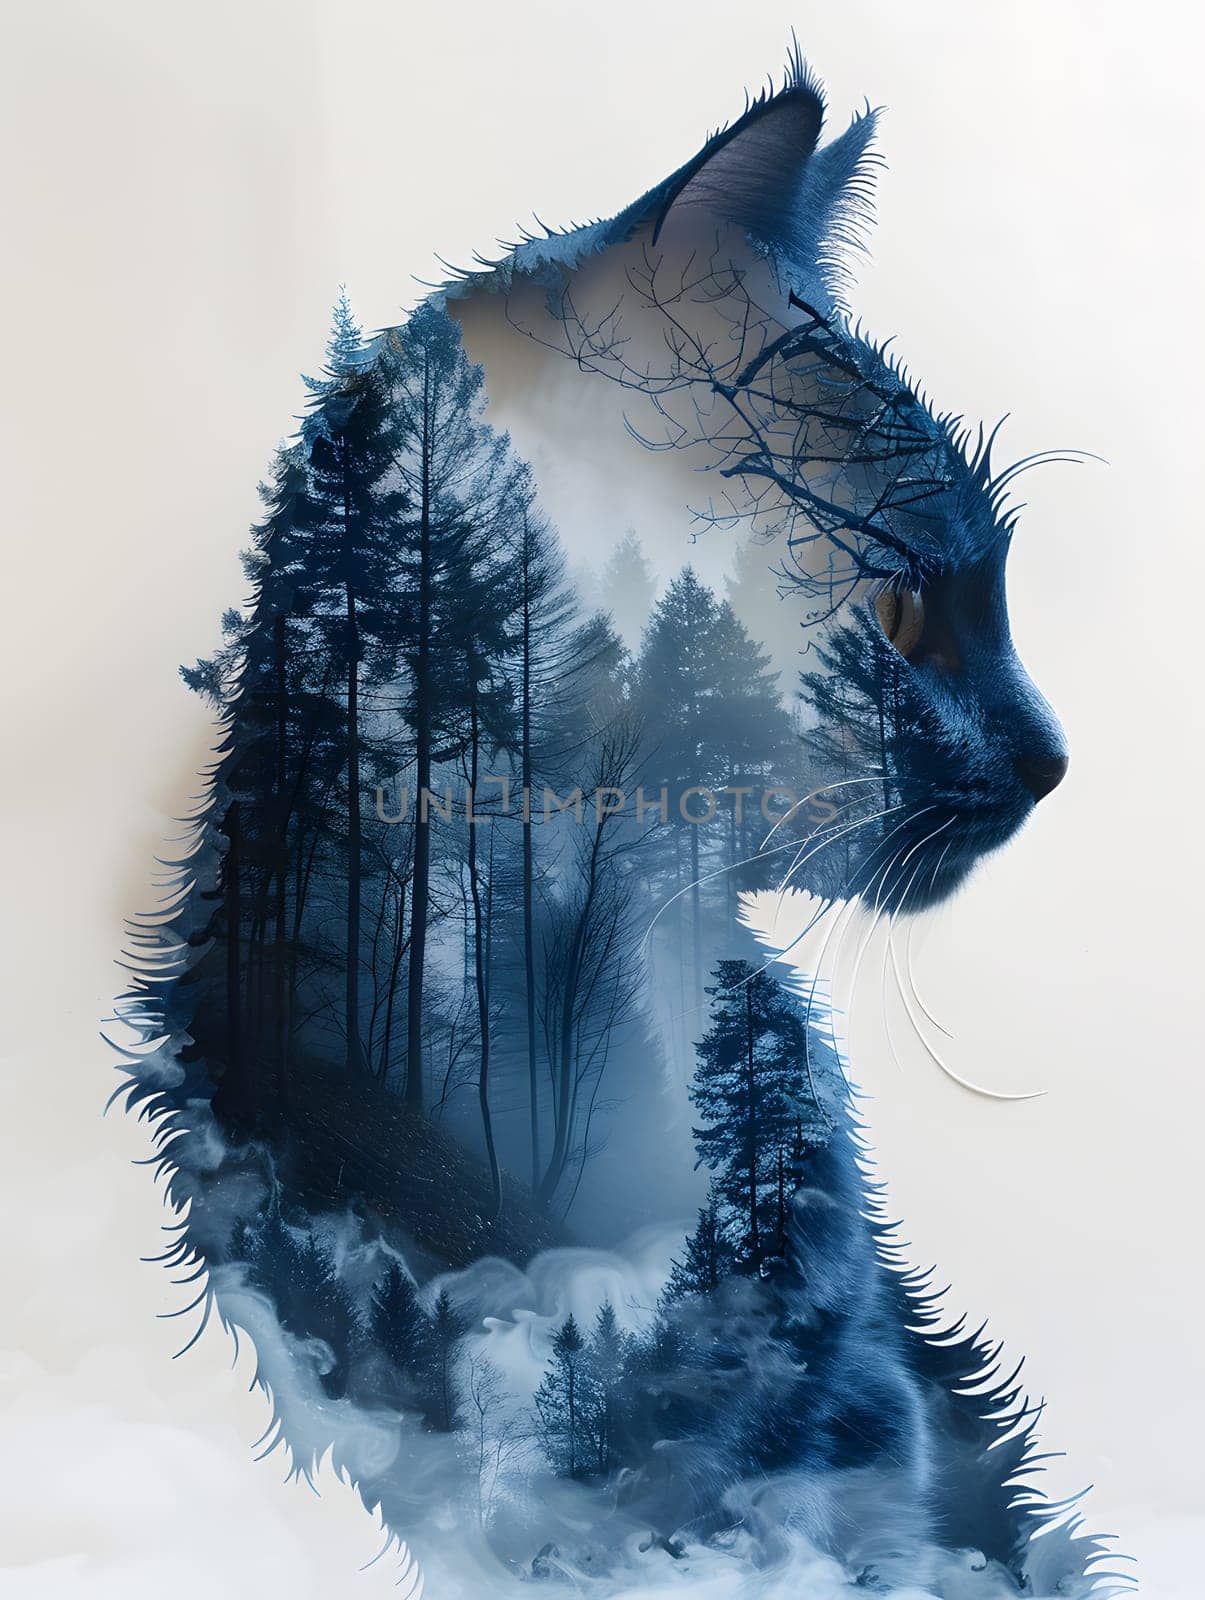 A double exposure of a Felidae, small to mediumsized cat with electric blue eyes, whiskers, fur, and tail superimposed on a lush forest background, showcasing the carnivores terrestrial nature